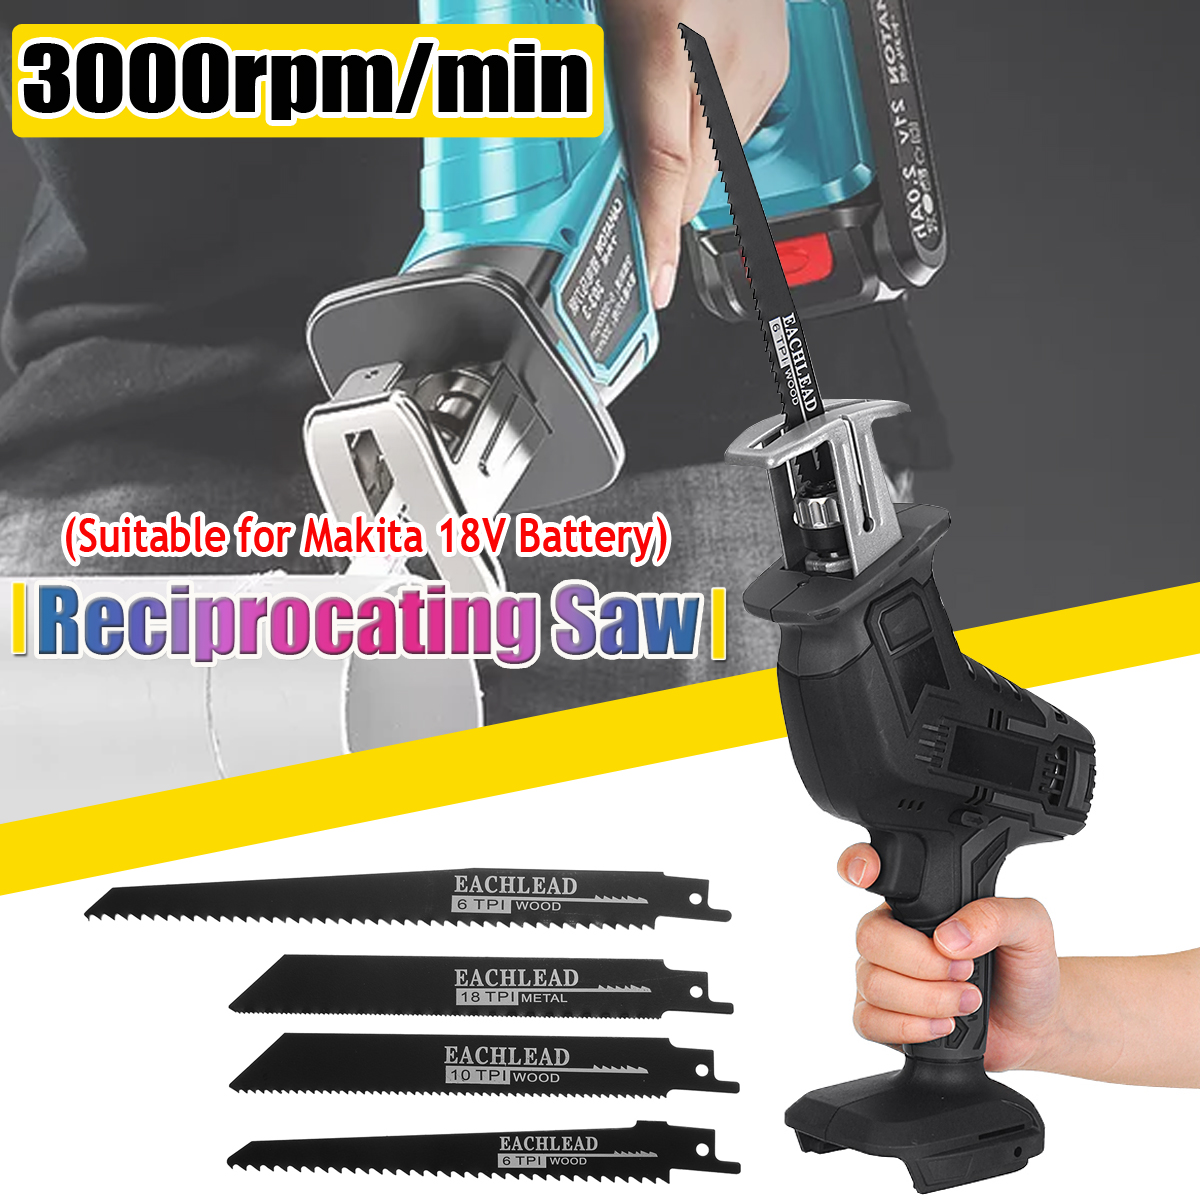 Cordless-Electric-Reciprocating-Saw-Wood-Saber-Cutting-Tool-With-4X-Saw-Blades-For-Makita-18V-Batter-1692528-1